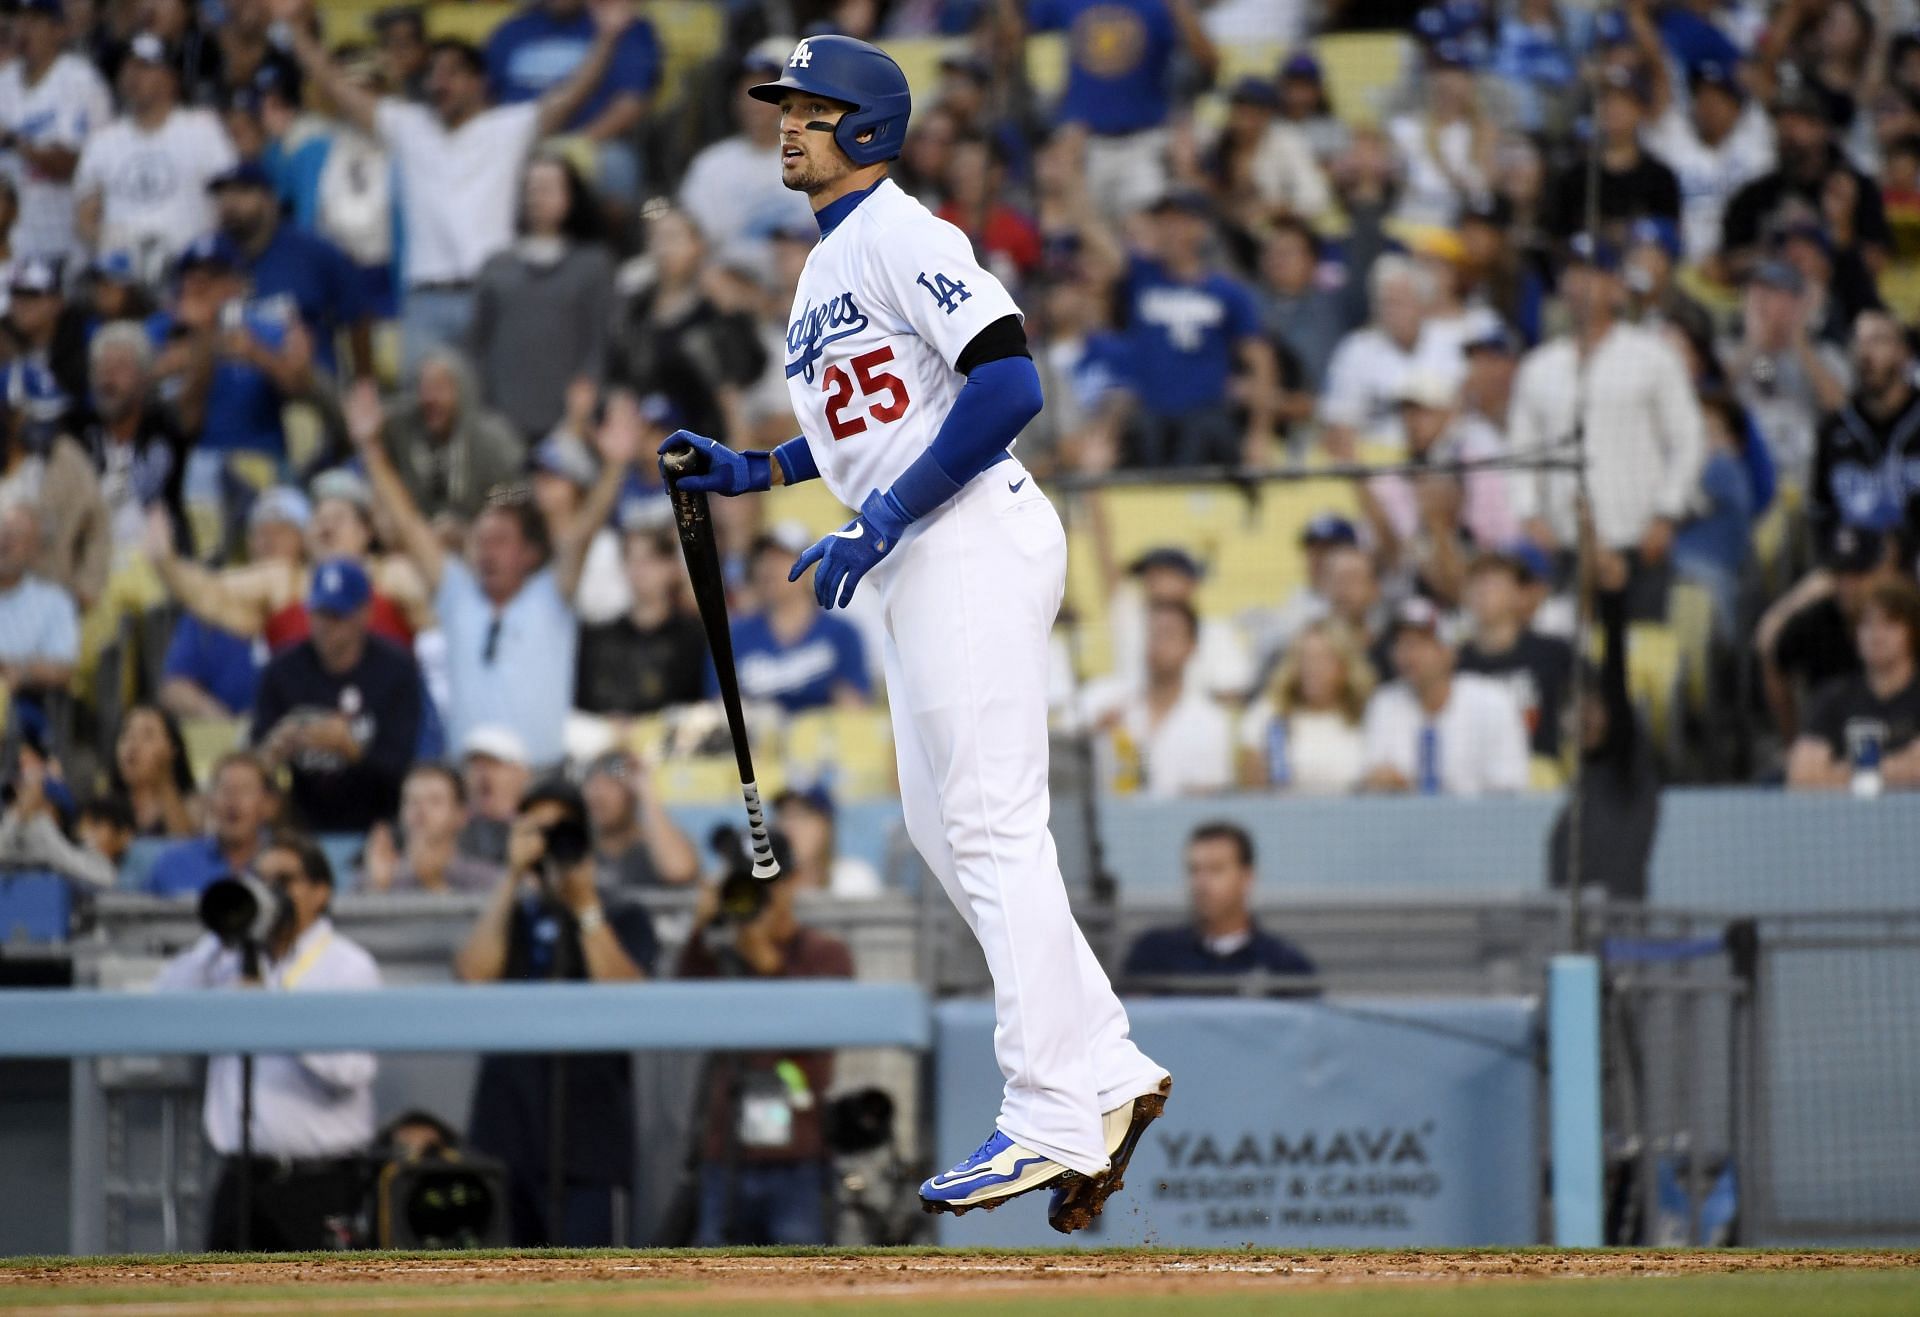 Mychal Thompson Reacts to Trayce's Return to the Dodgers